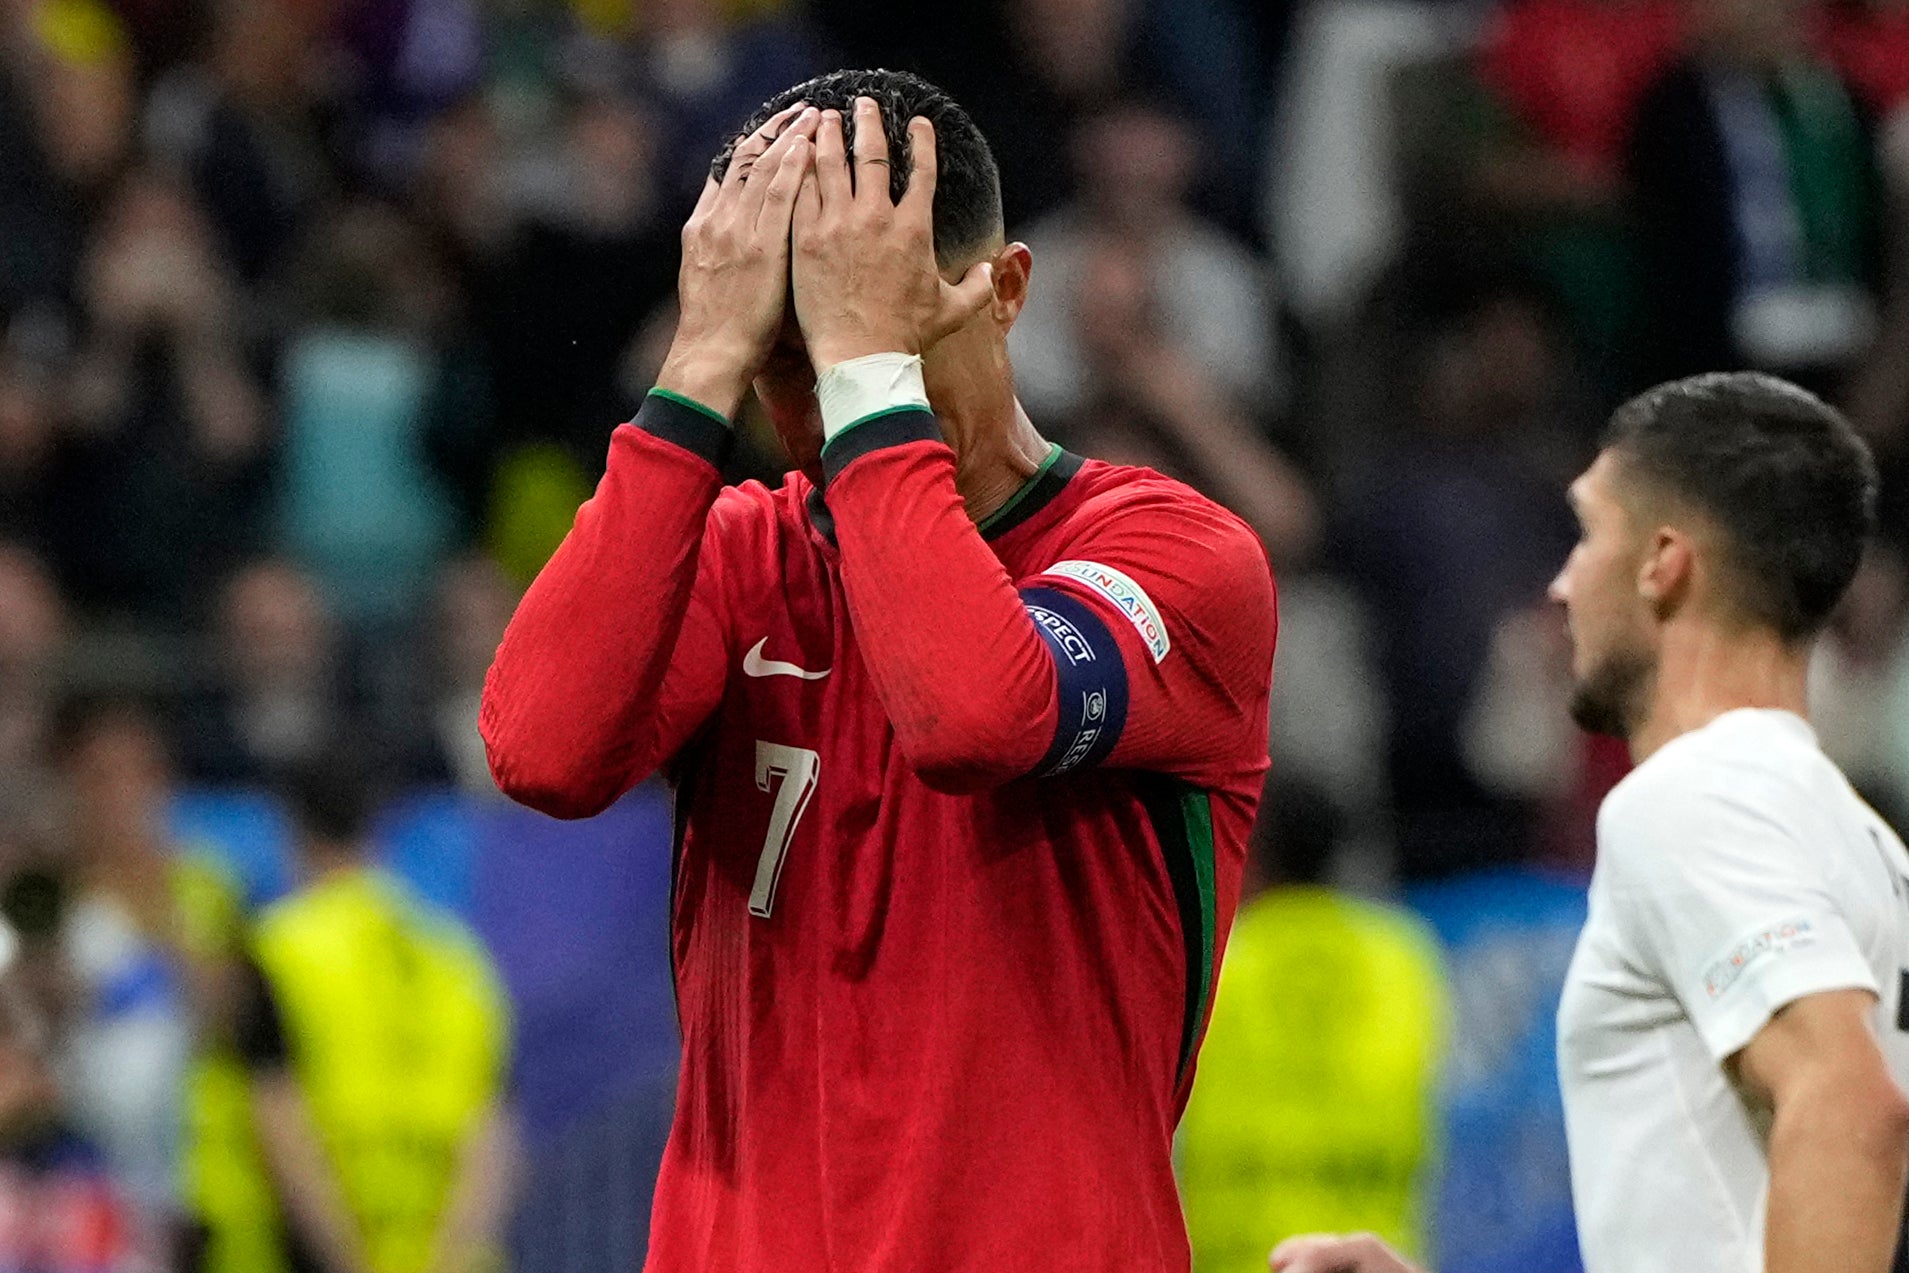 Cristiano Ronaldo burst into tears after his penalty miss against Slovenia